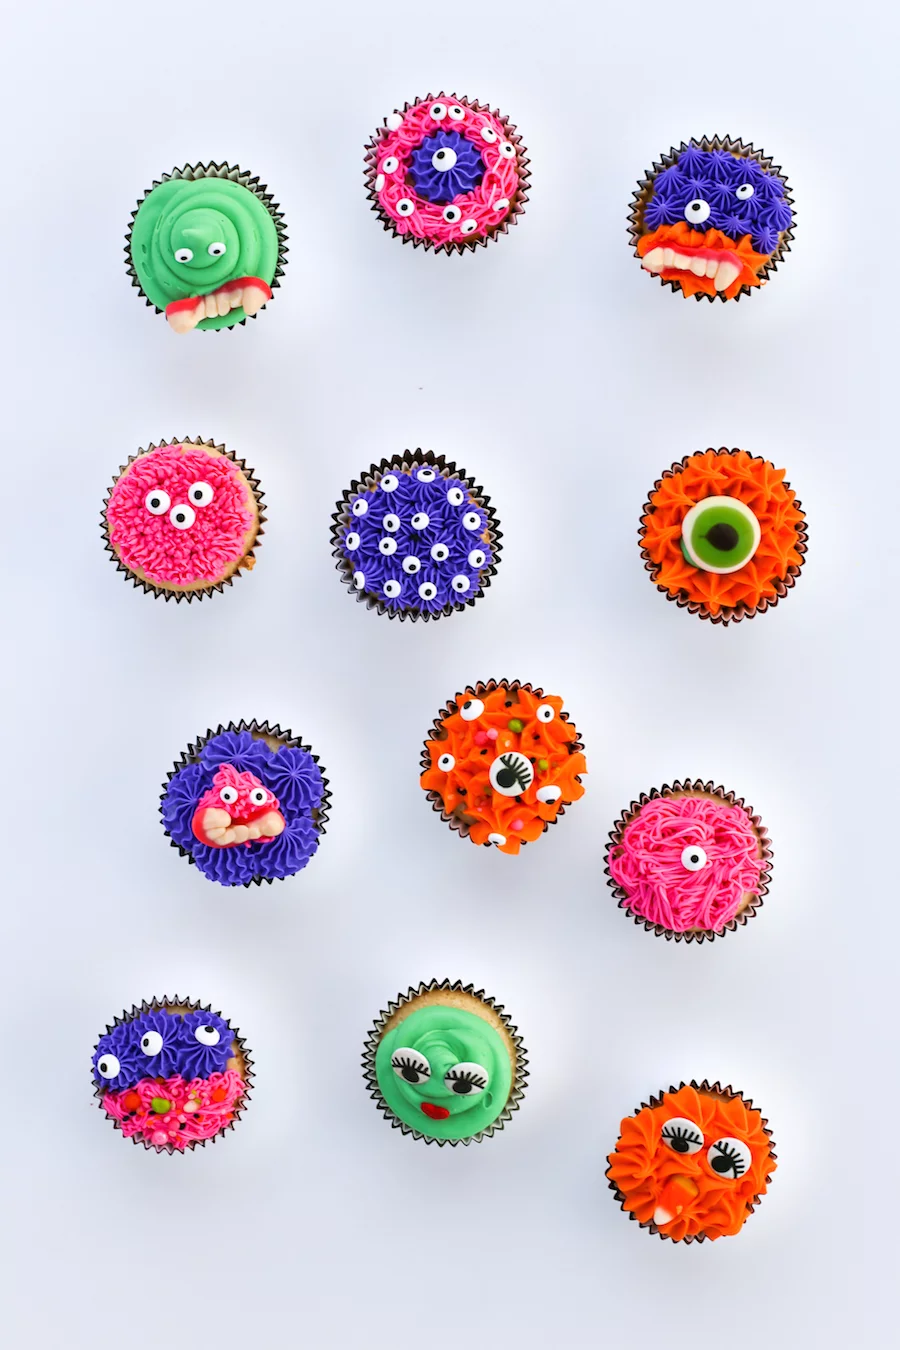 Set up a Decorate-It-Yourself Halloween Monster Cupcake Station at your Halloween party! // Salty Canary